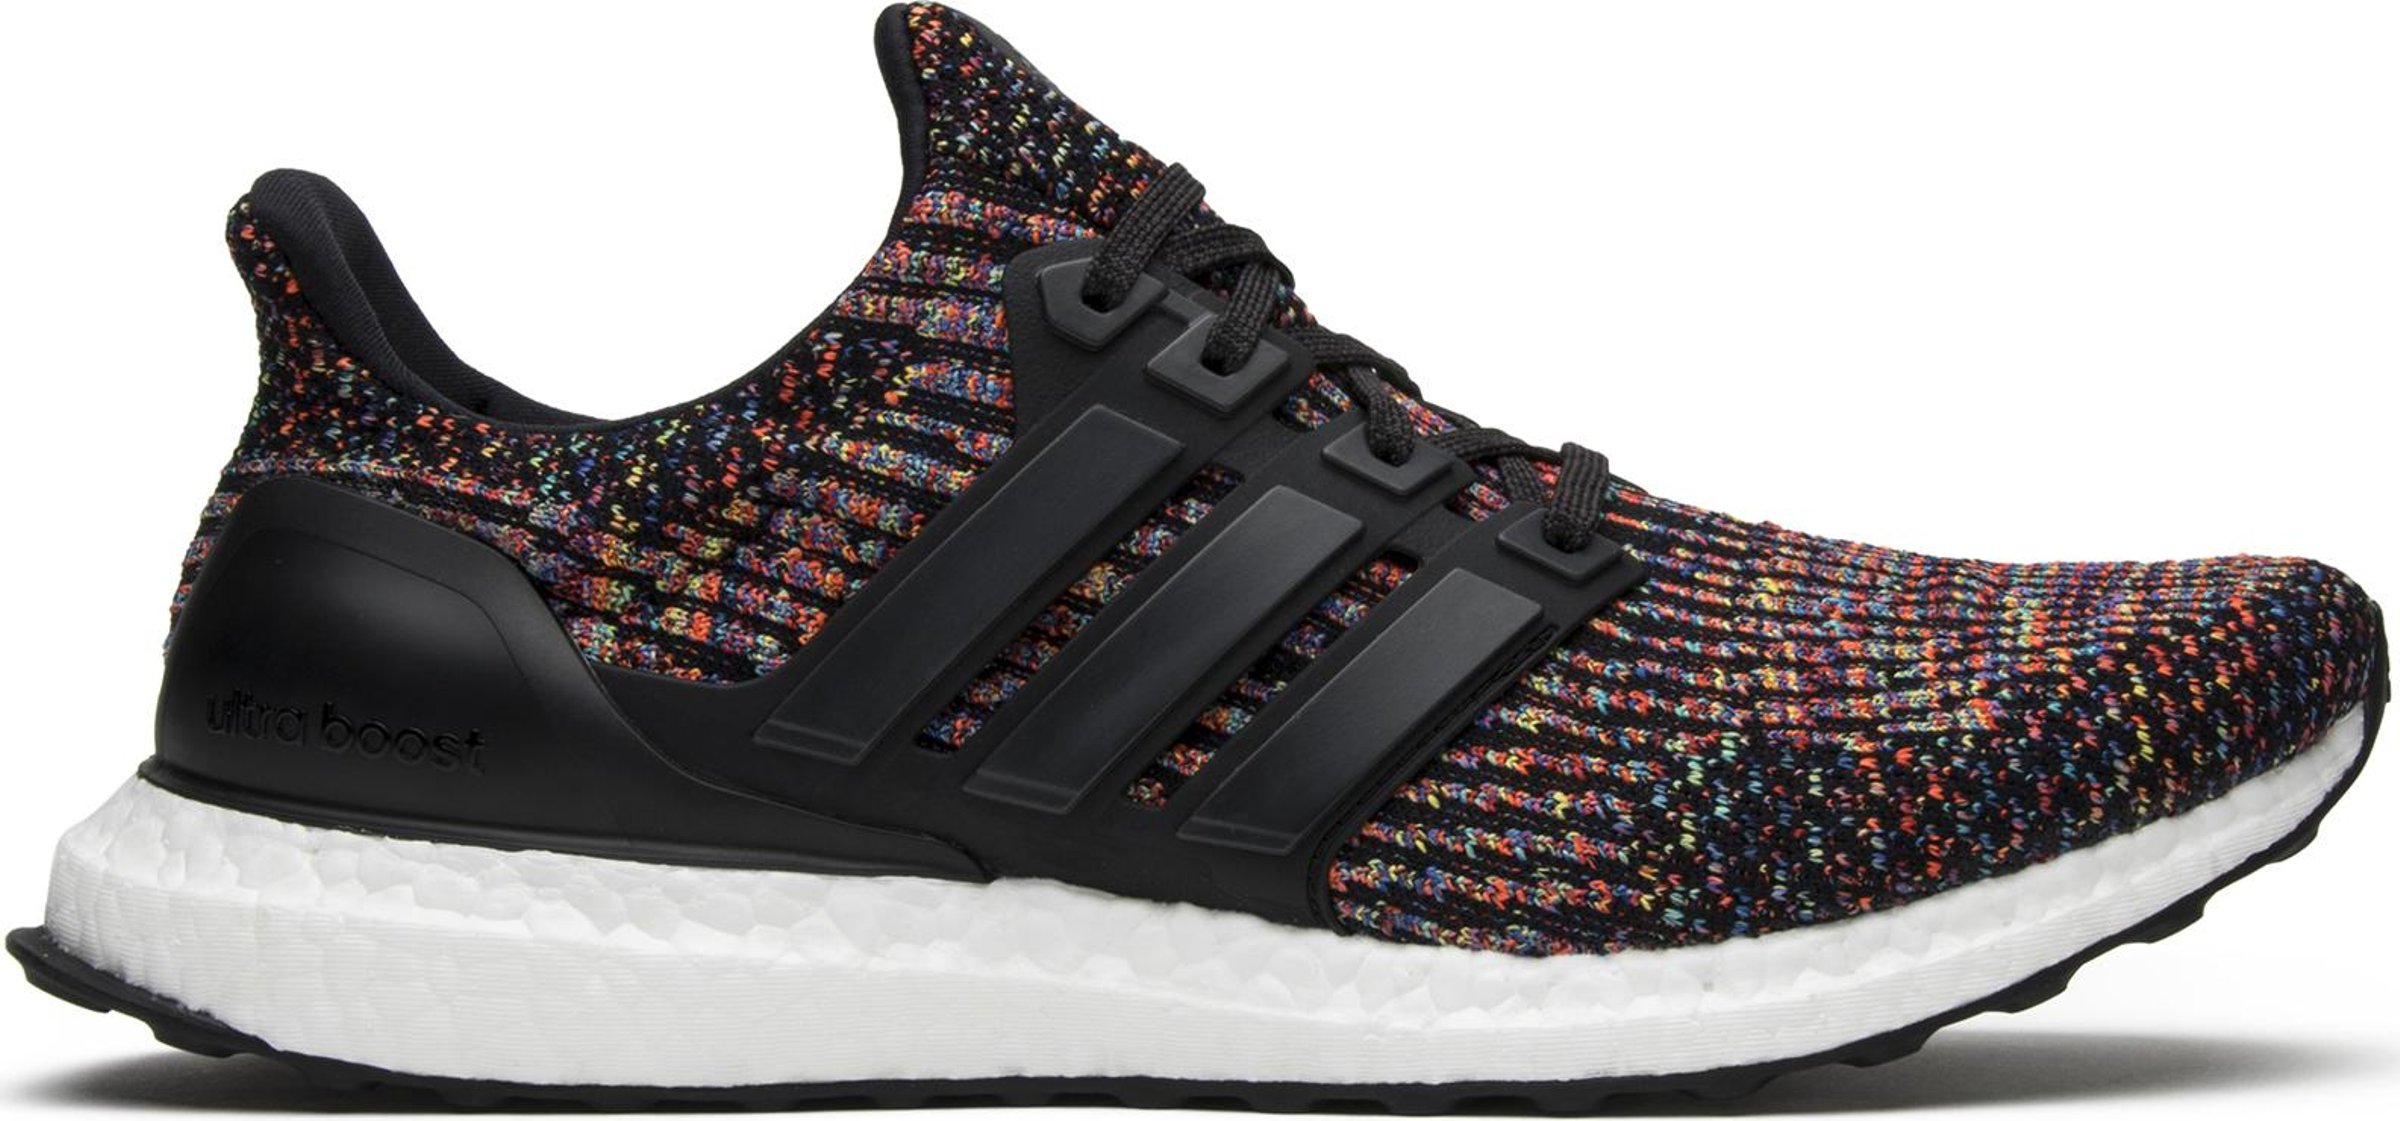 Buy UltraBoost 3.0 Limited 'Multi-Color' - CG3004 | GOAT